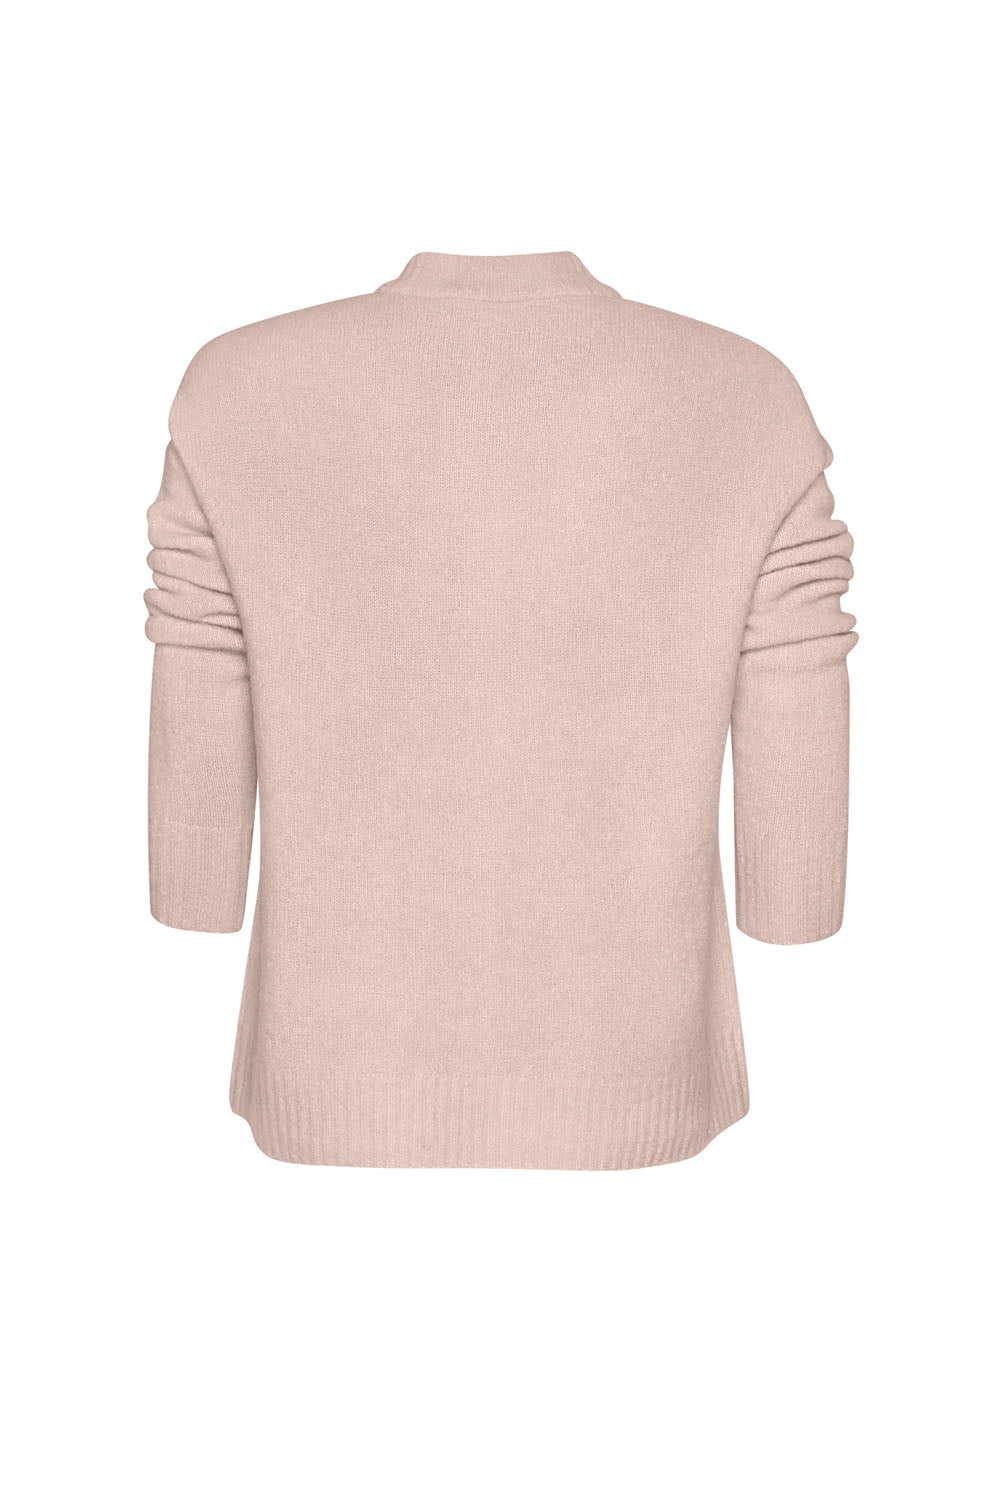 MADLY SWEETLY DOWNY JR CARDI - BLUSH - THE VOGUE STORE